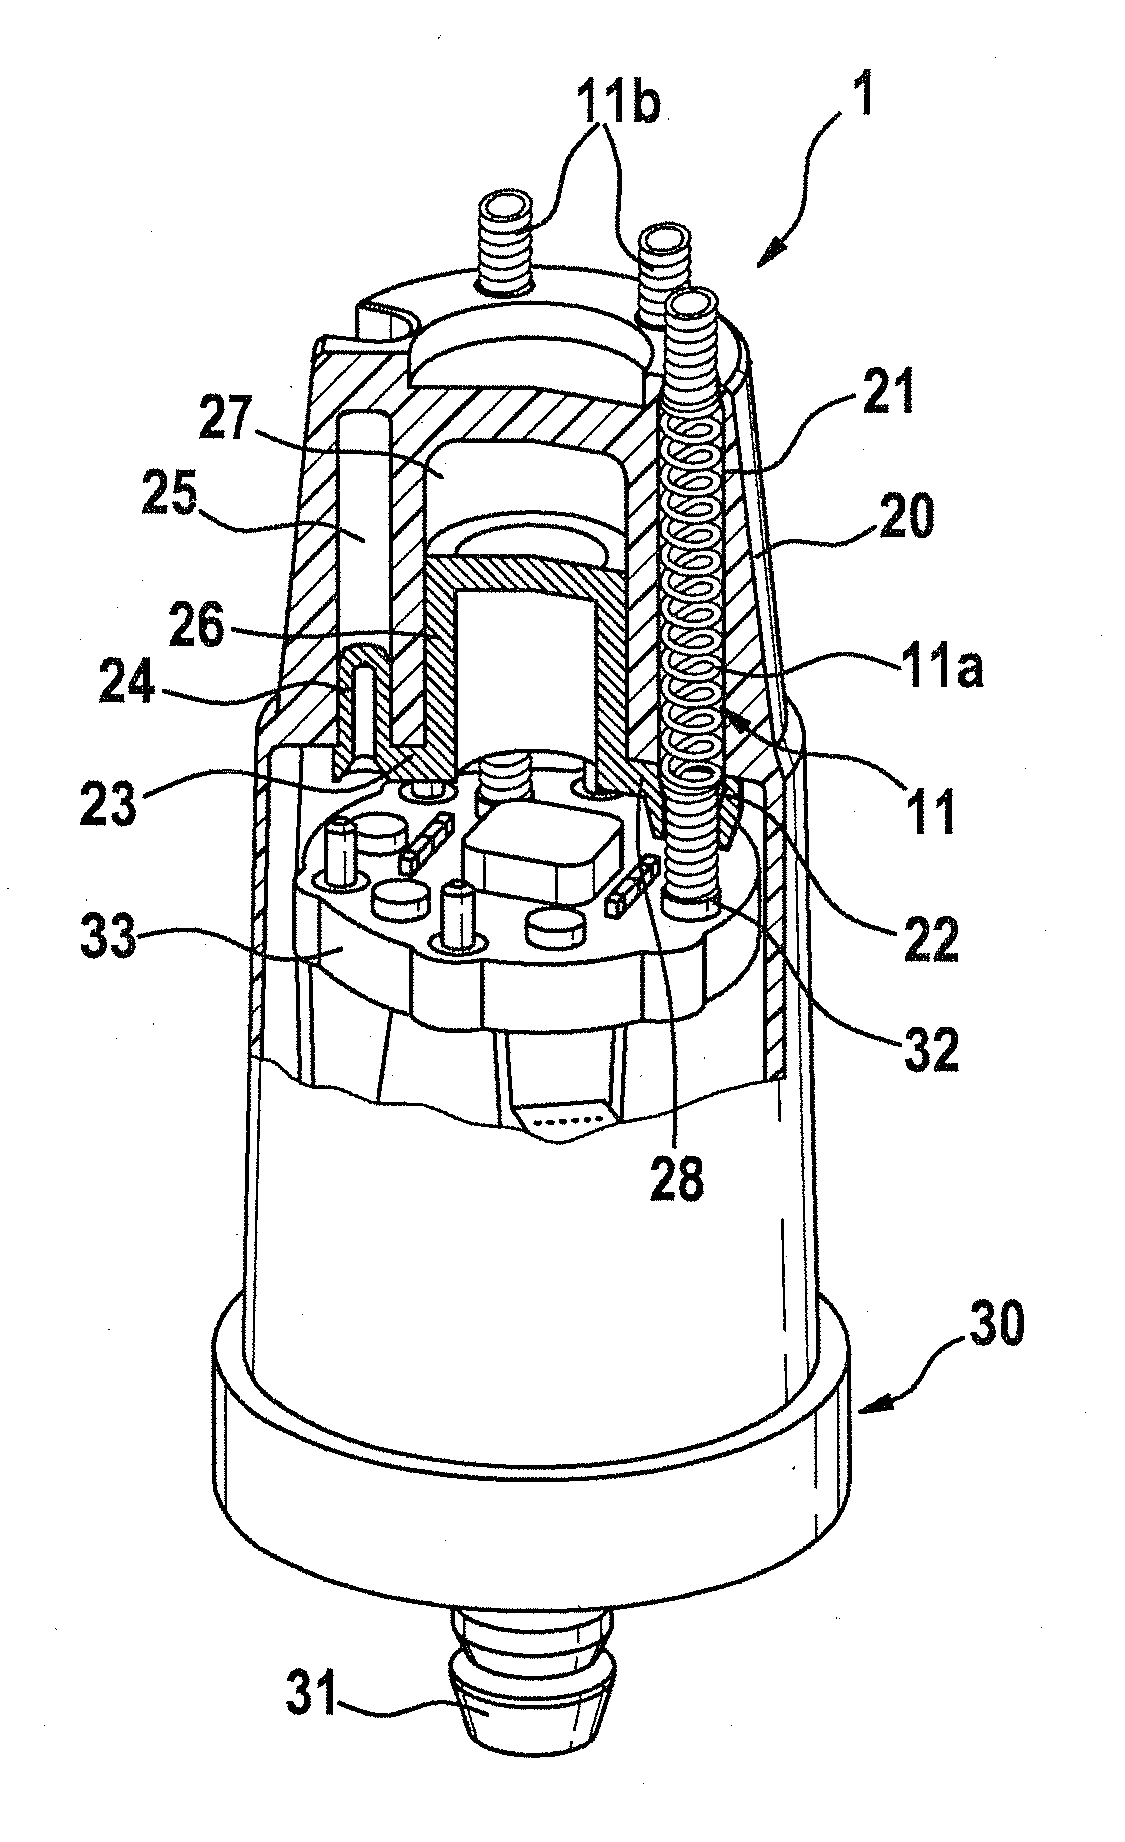 Pre-installation assembly for a contact arrangement of a sensor assembly